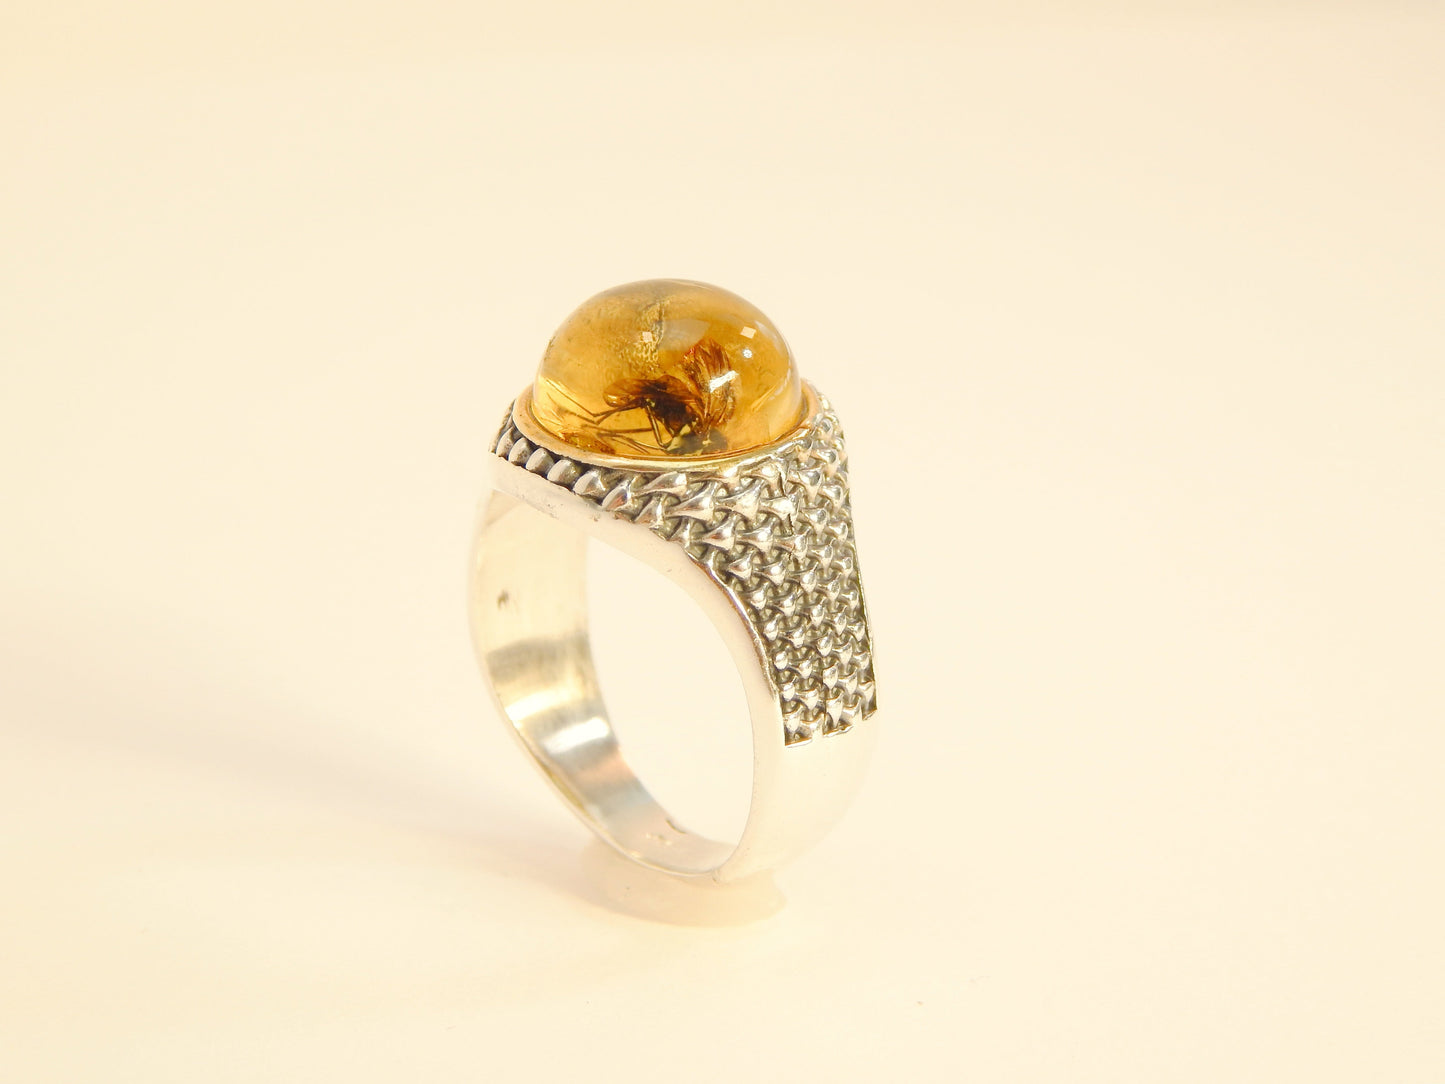 Natural Baltic Lemon Amber with Fossilized Insect Unisex Ring in 925 Sterling Silver